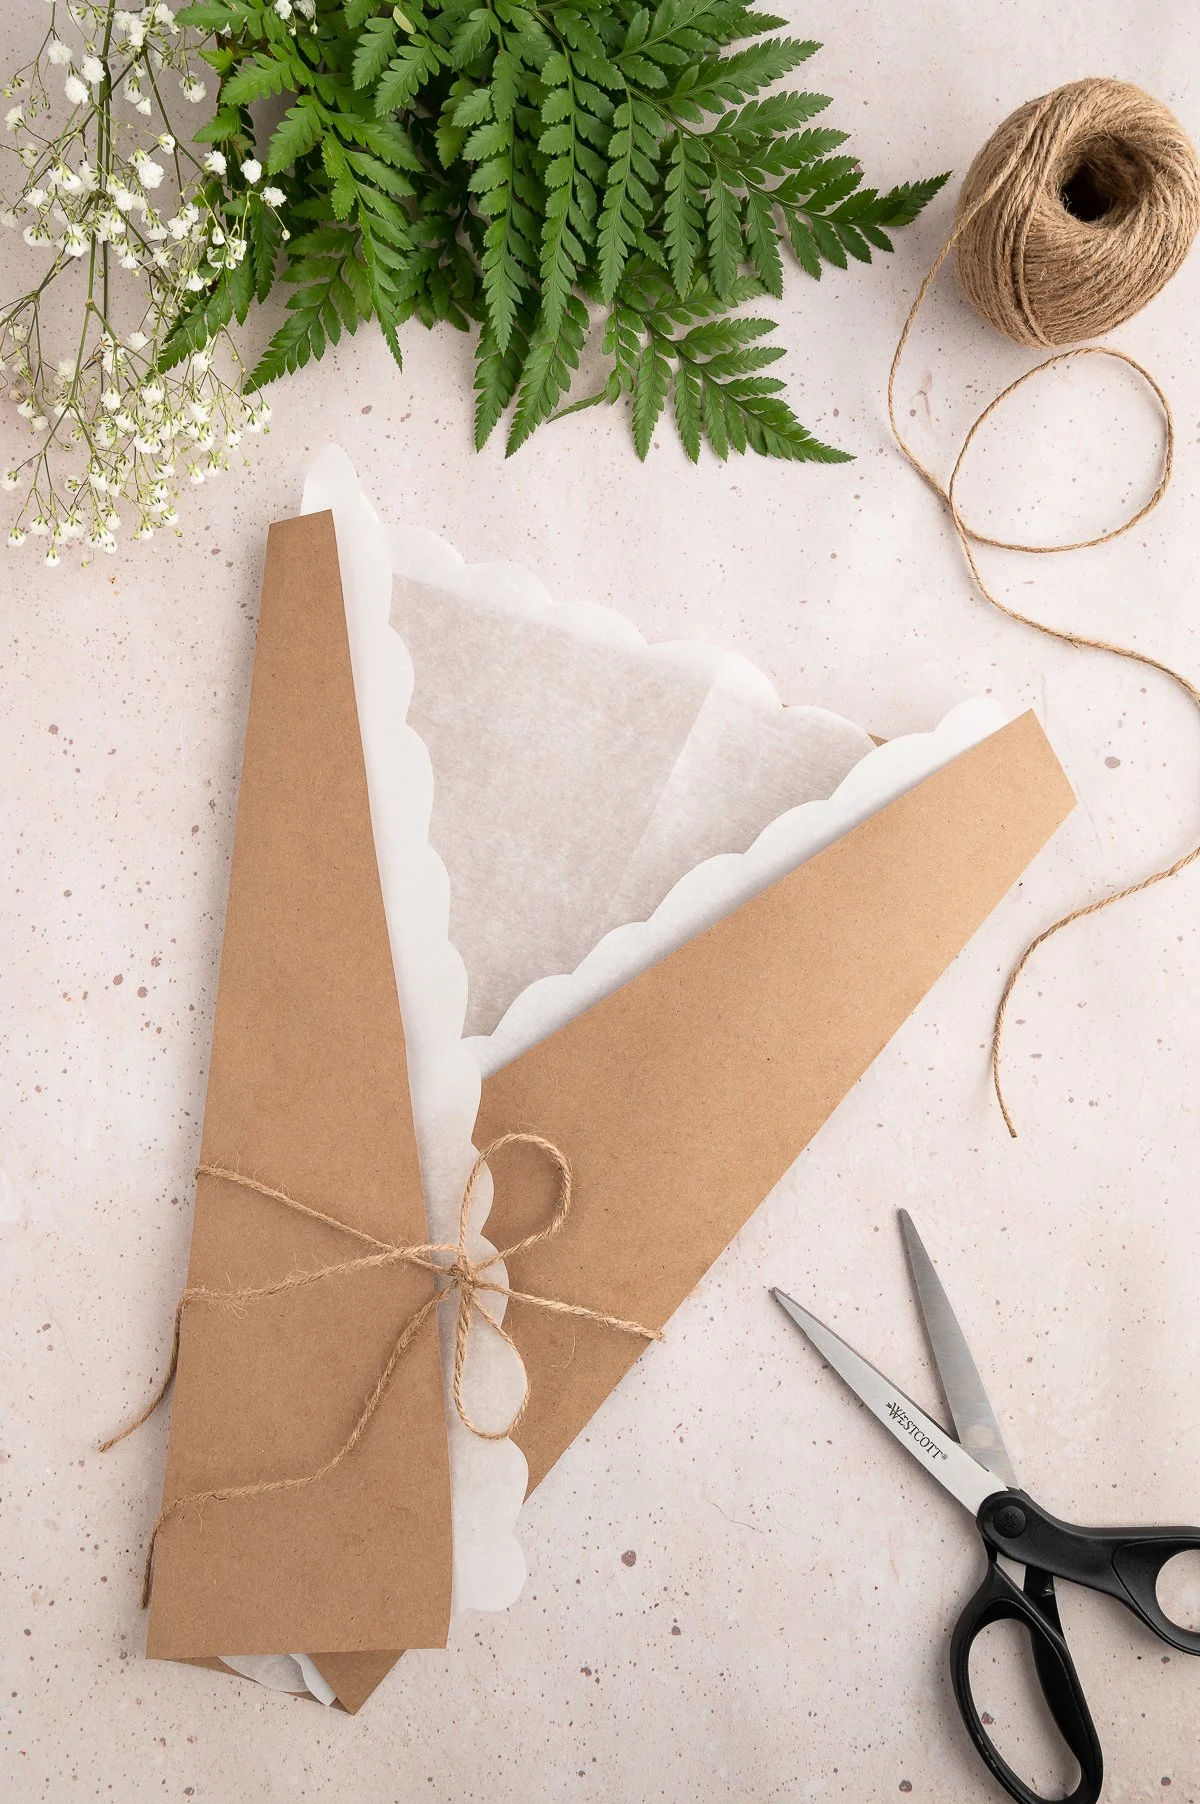 wrapping kraft and parchment paper to set up to make a charcuterie board